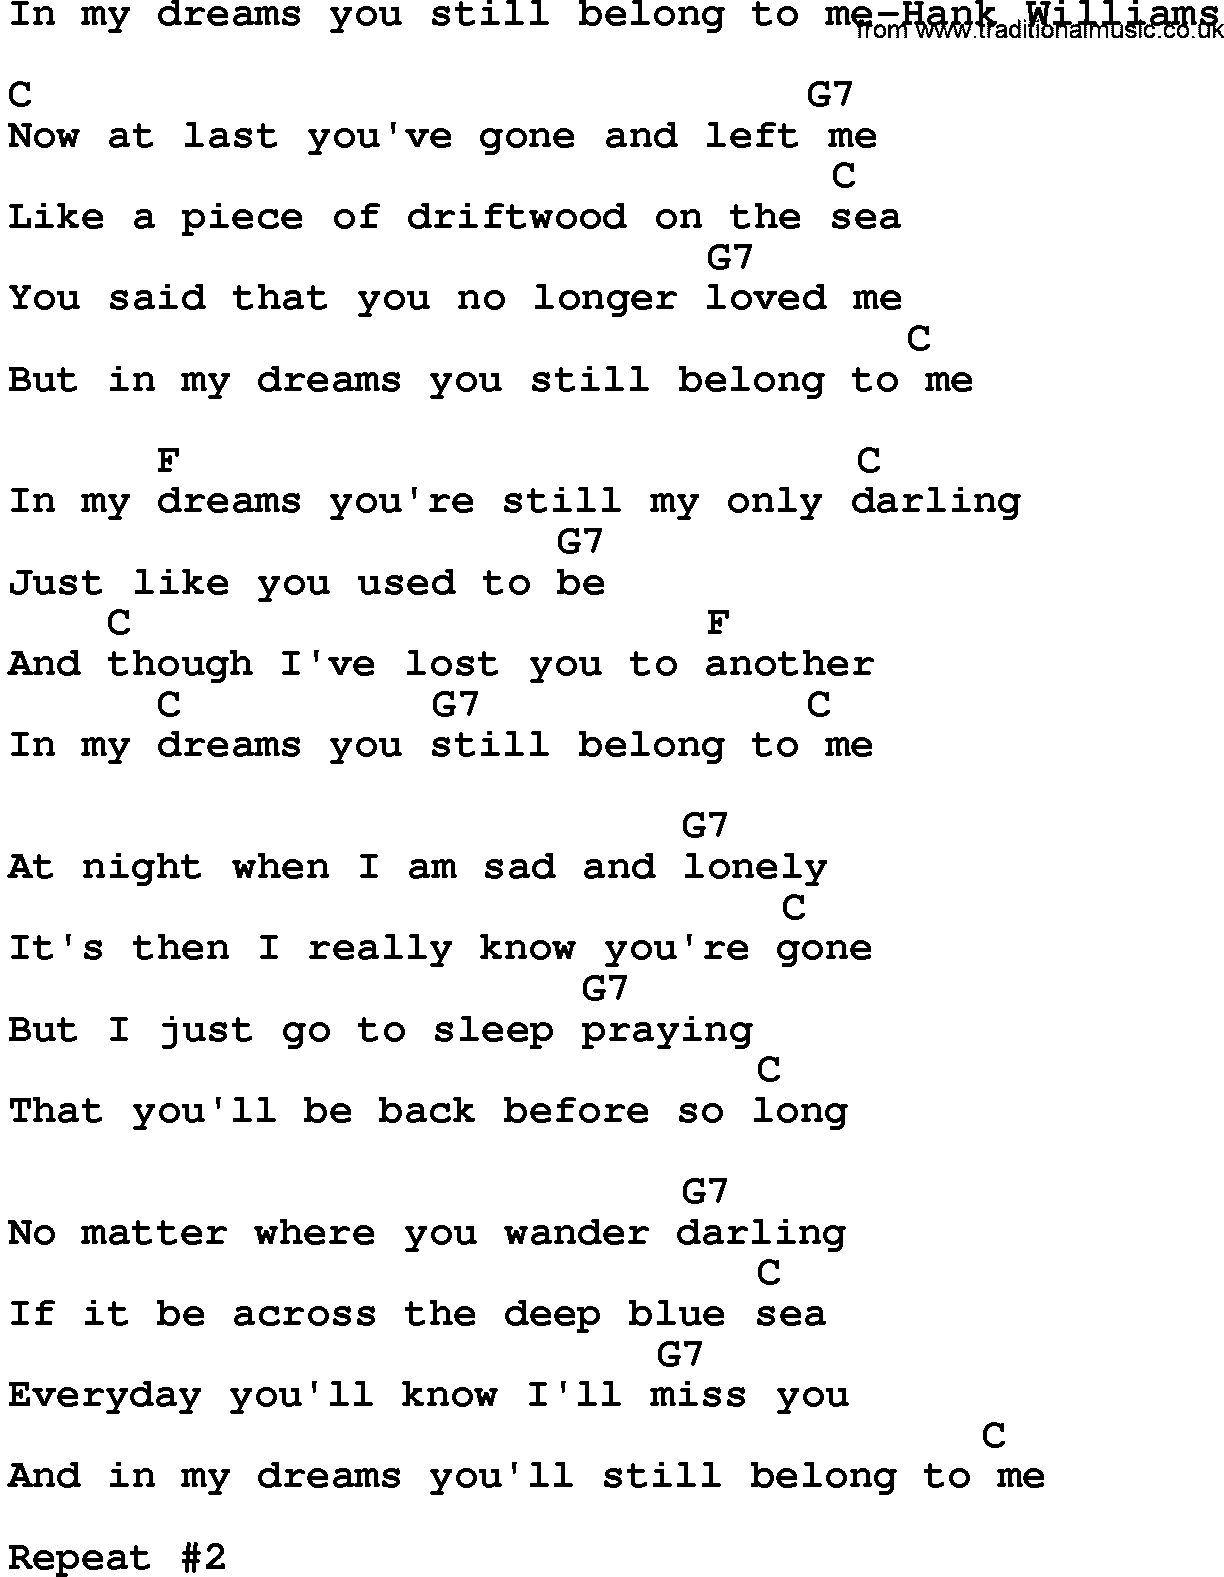 Country music song: In My Dreams You Still Belong To Me-Hank Williams lyrics and chords